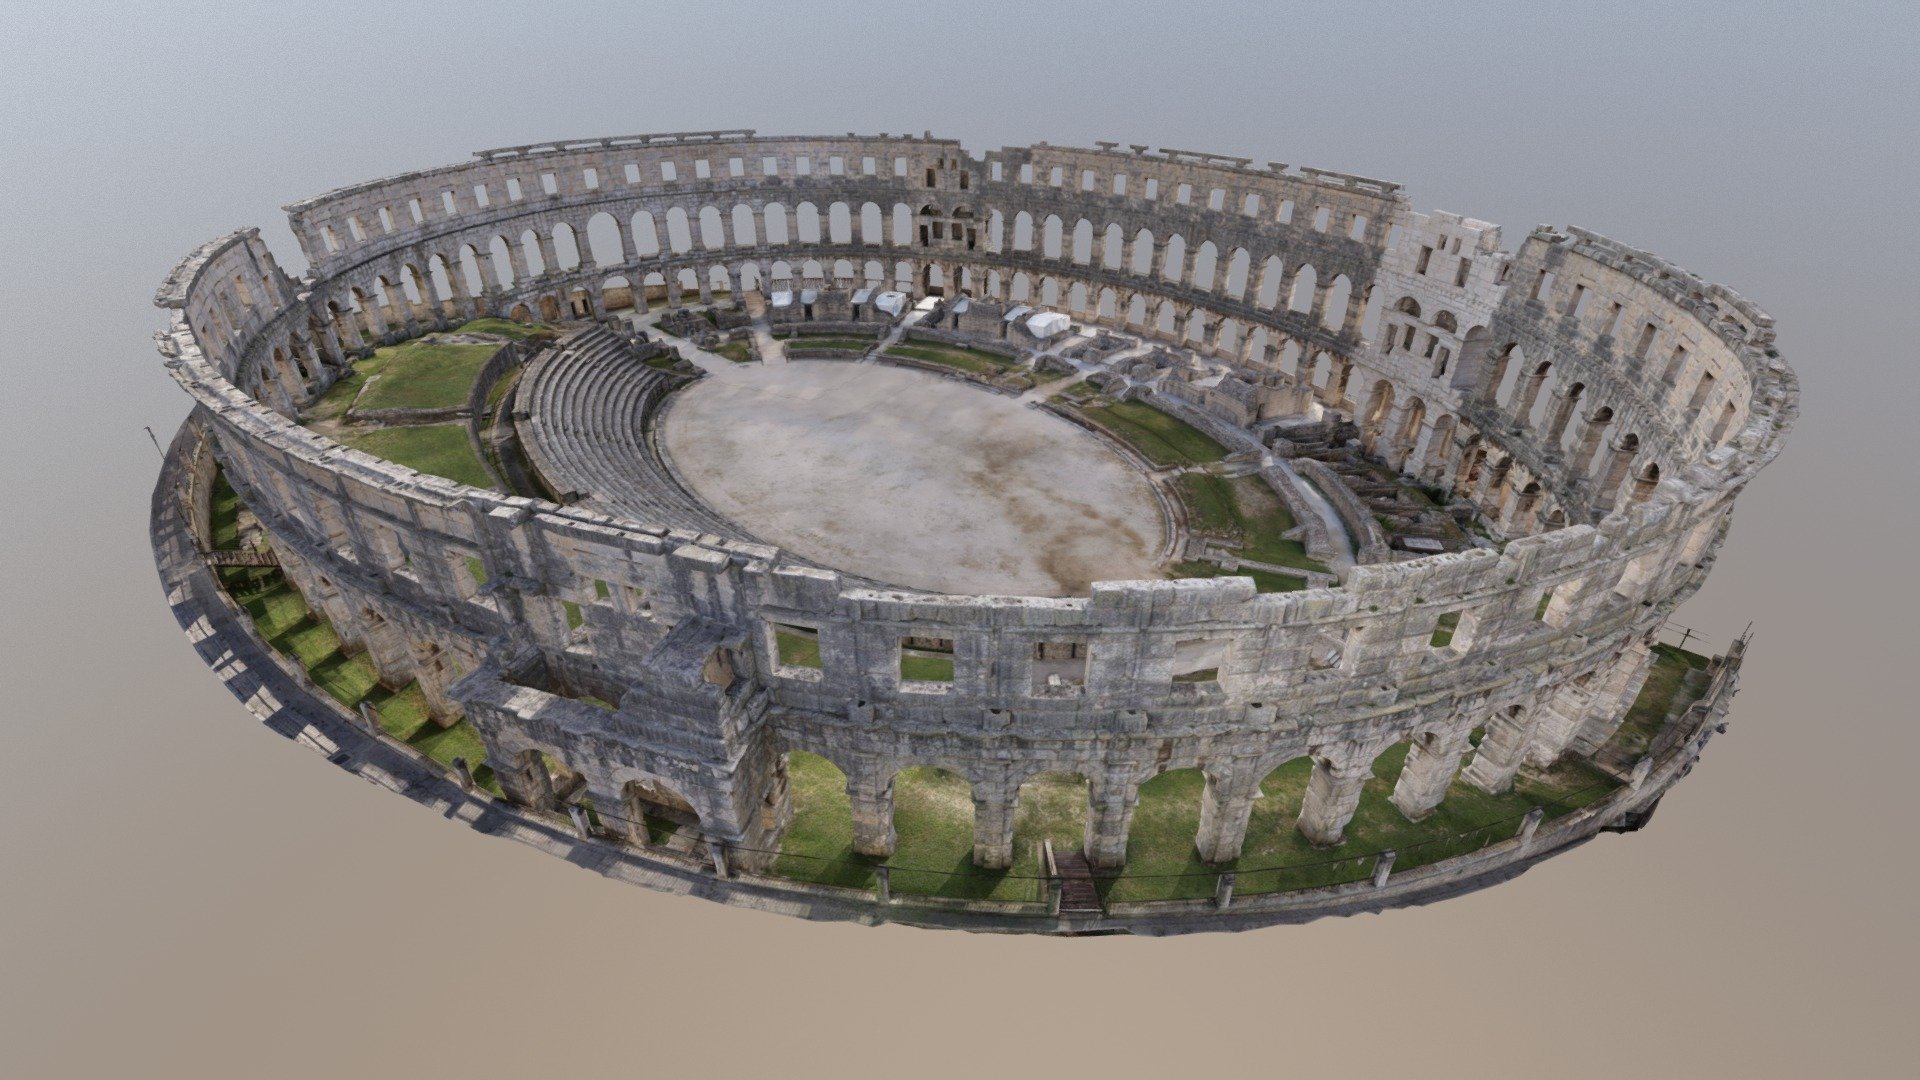 This is reduced 3D polygonal model of the Roman Amphitheater in Pula (Croatia), created from 5790 photos + 3D scans. Original model has 1.1B polygons.

The goal of the project was to create high-res polygonal model and unfolded orthophoto of the amphitheatre's outer walls.

3D scanning and photogrammetry by Vektra d.o.o 3d model